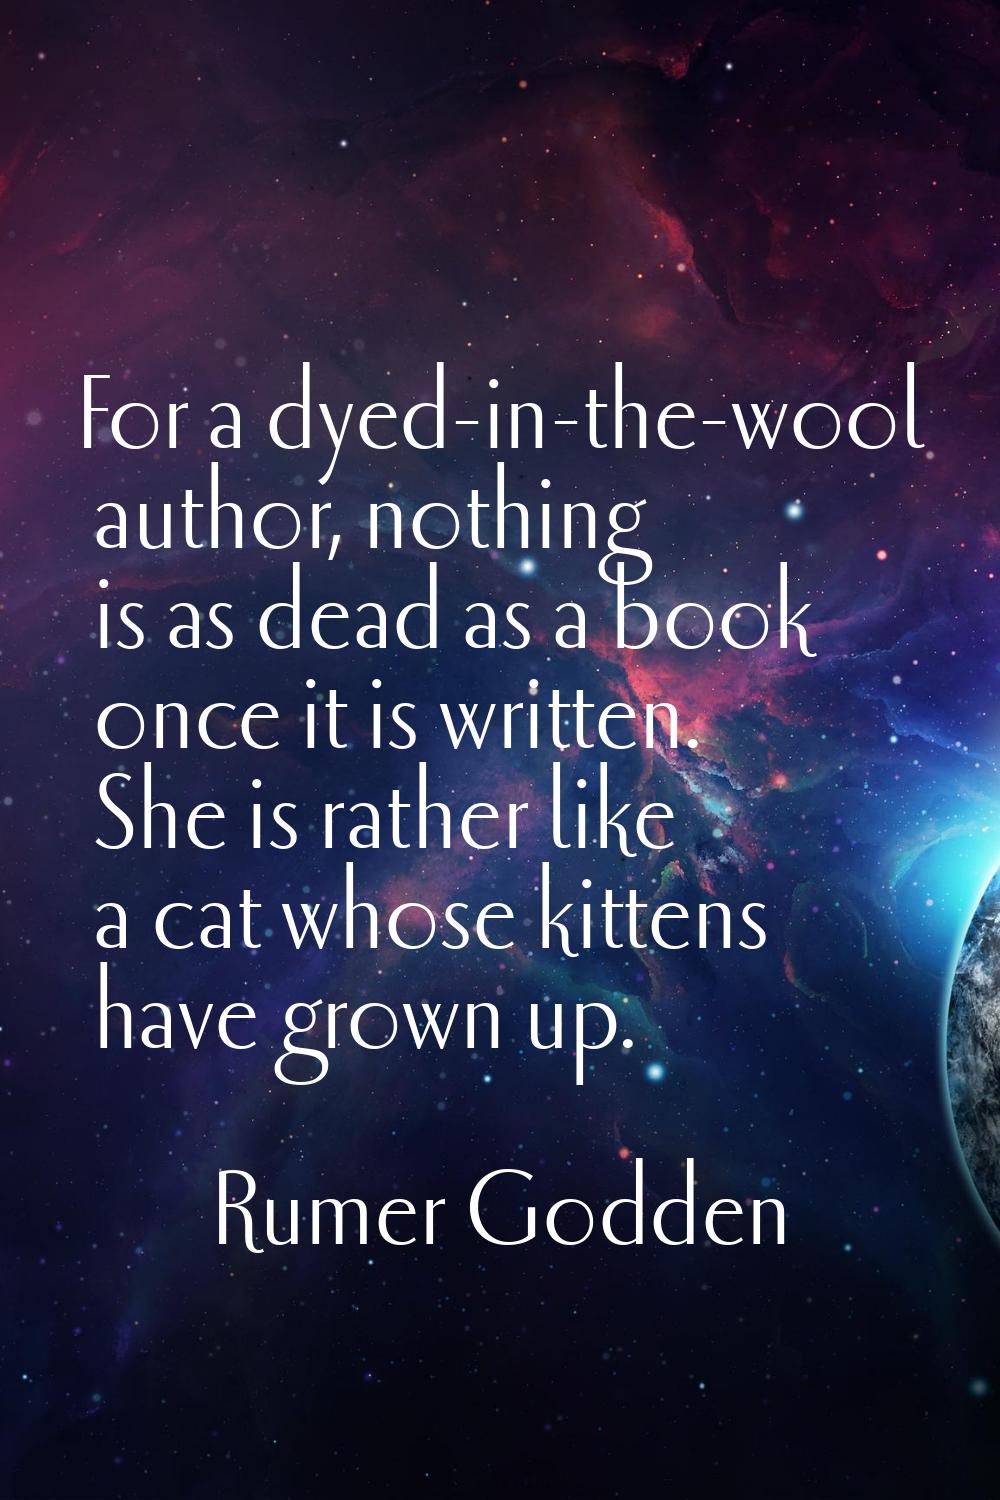 For a dyed-in-the-wool author, nothing is as dead as a book once it is written. She is rather like 